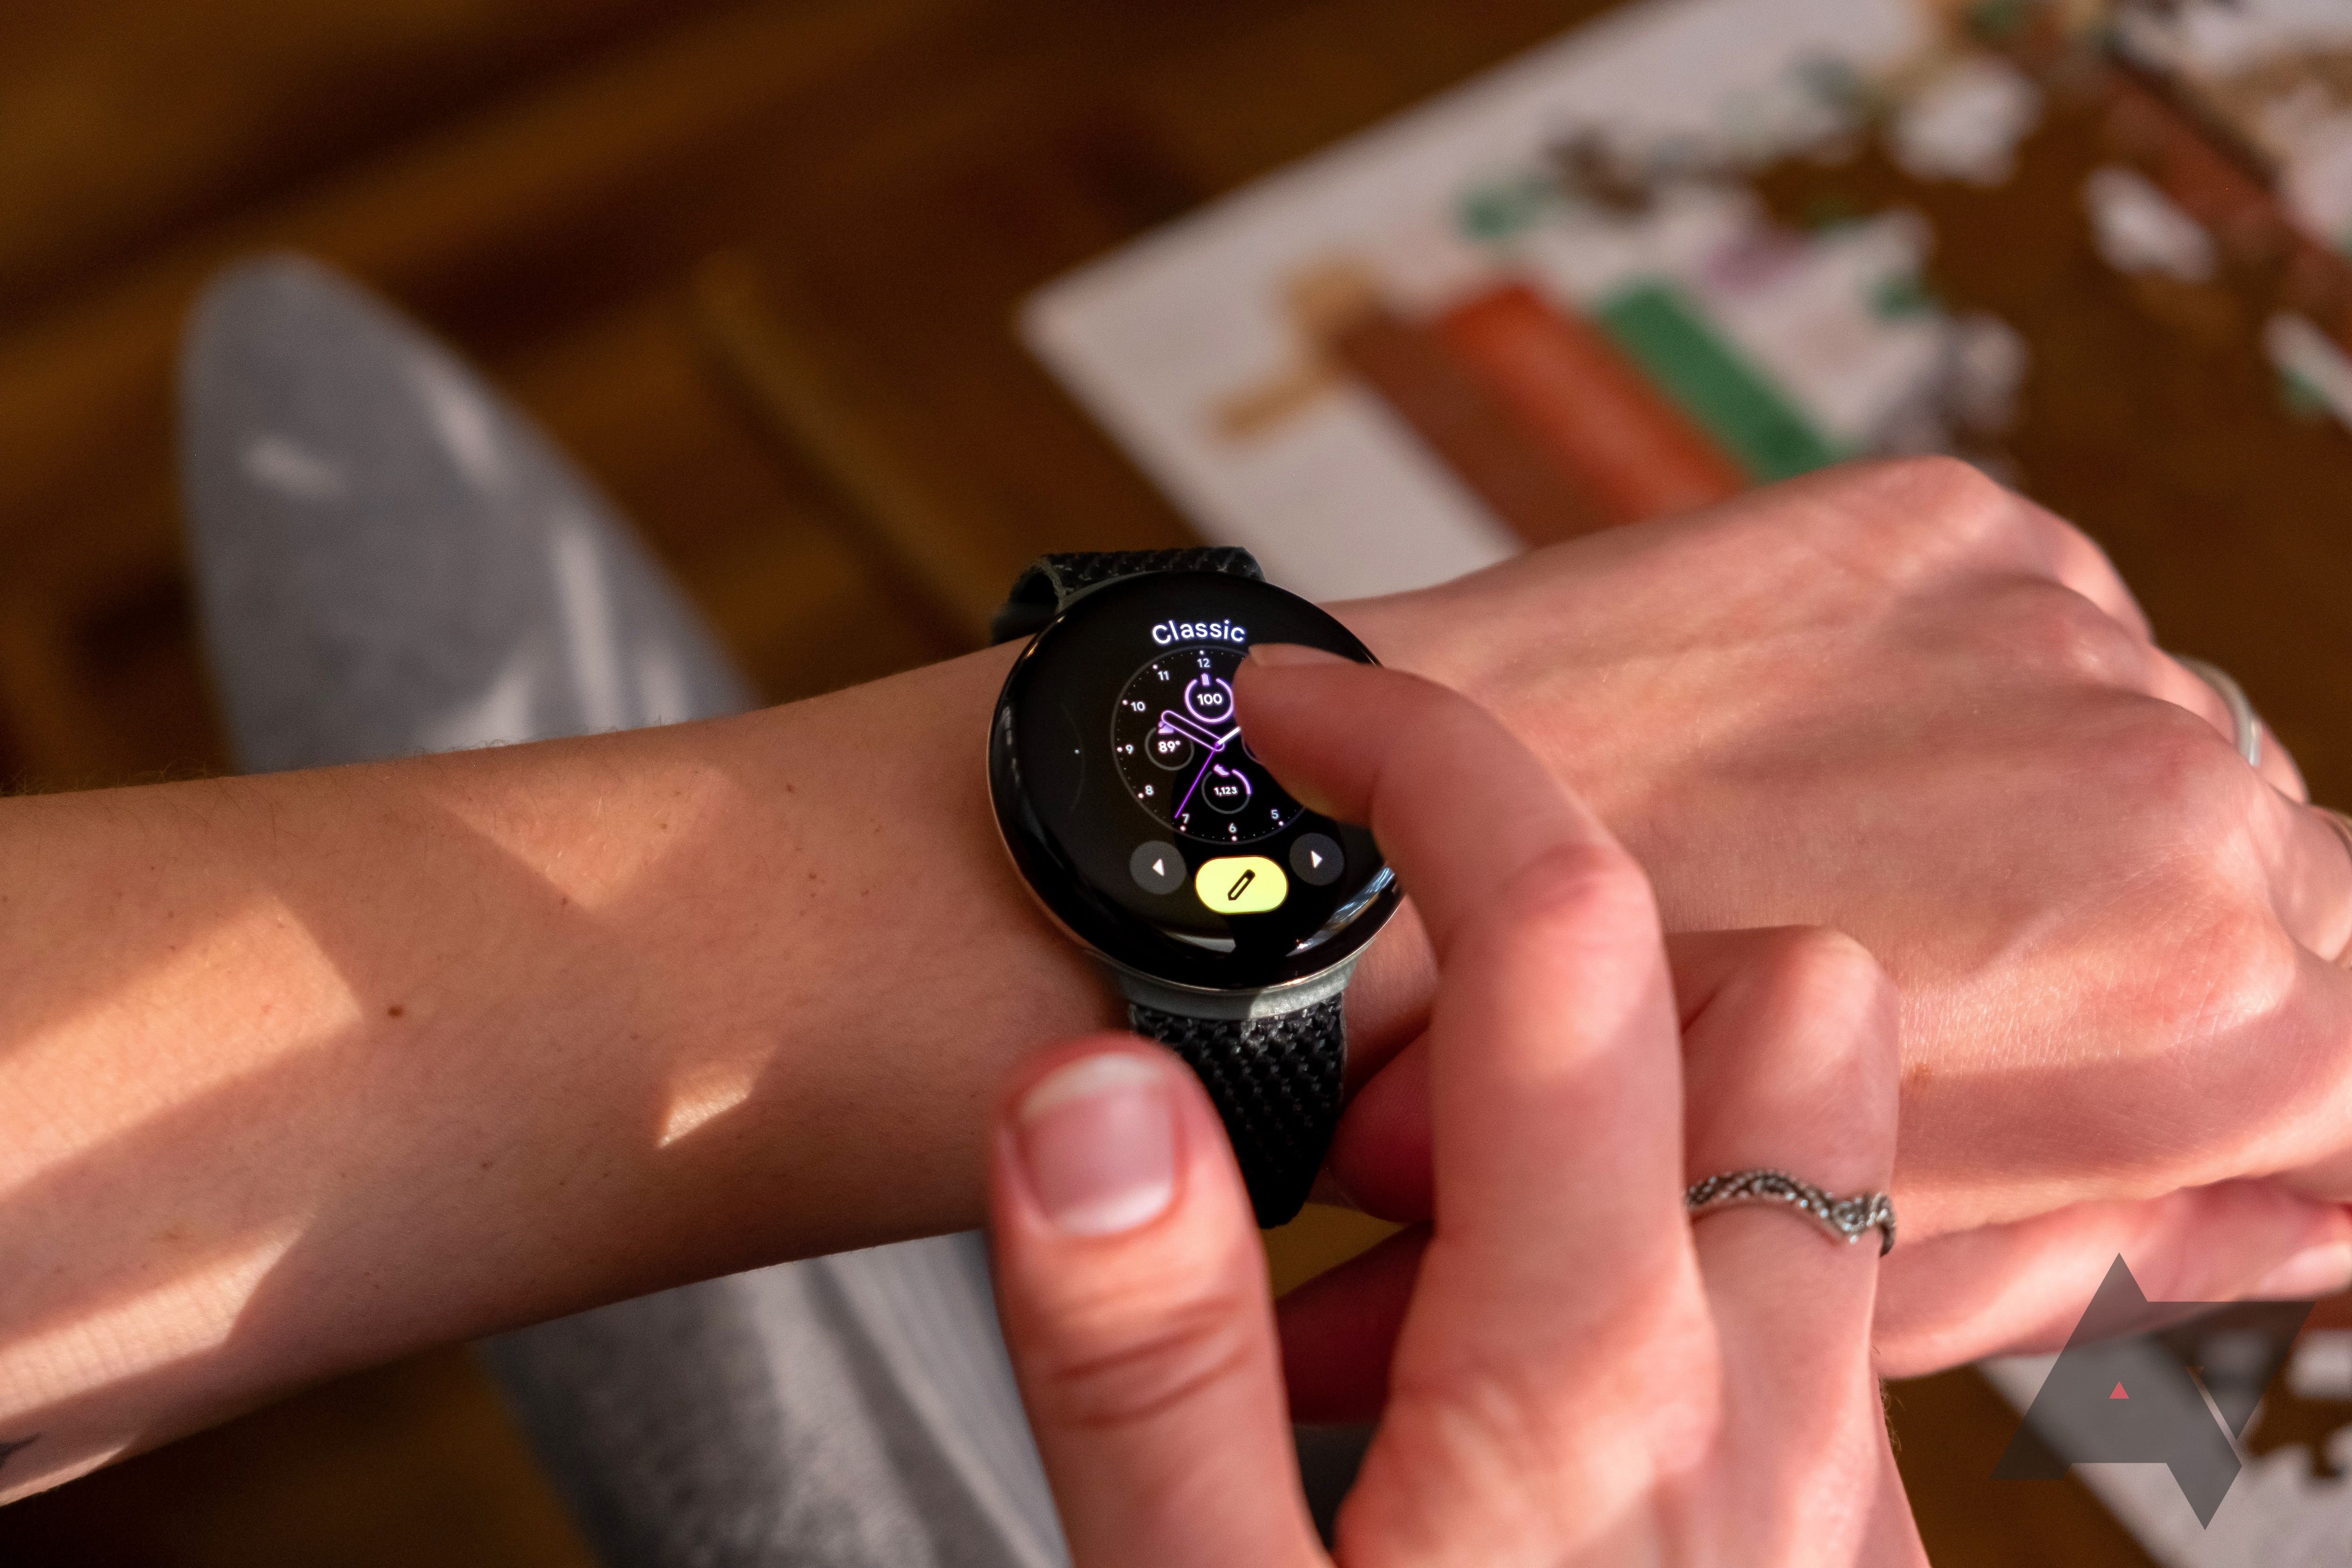 A person changing the watch face on a smartwatch.